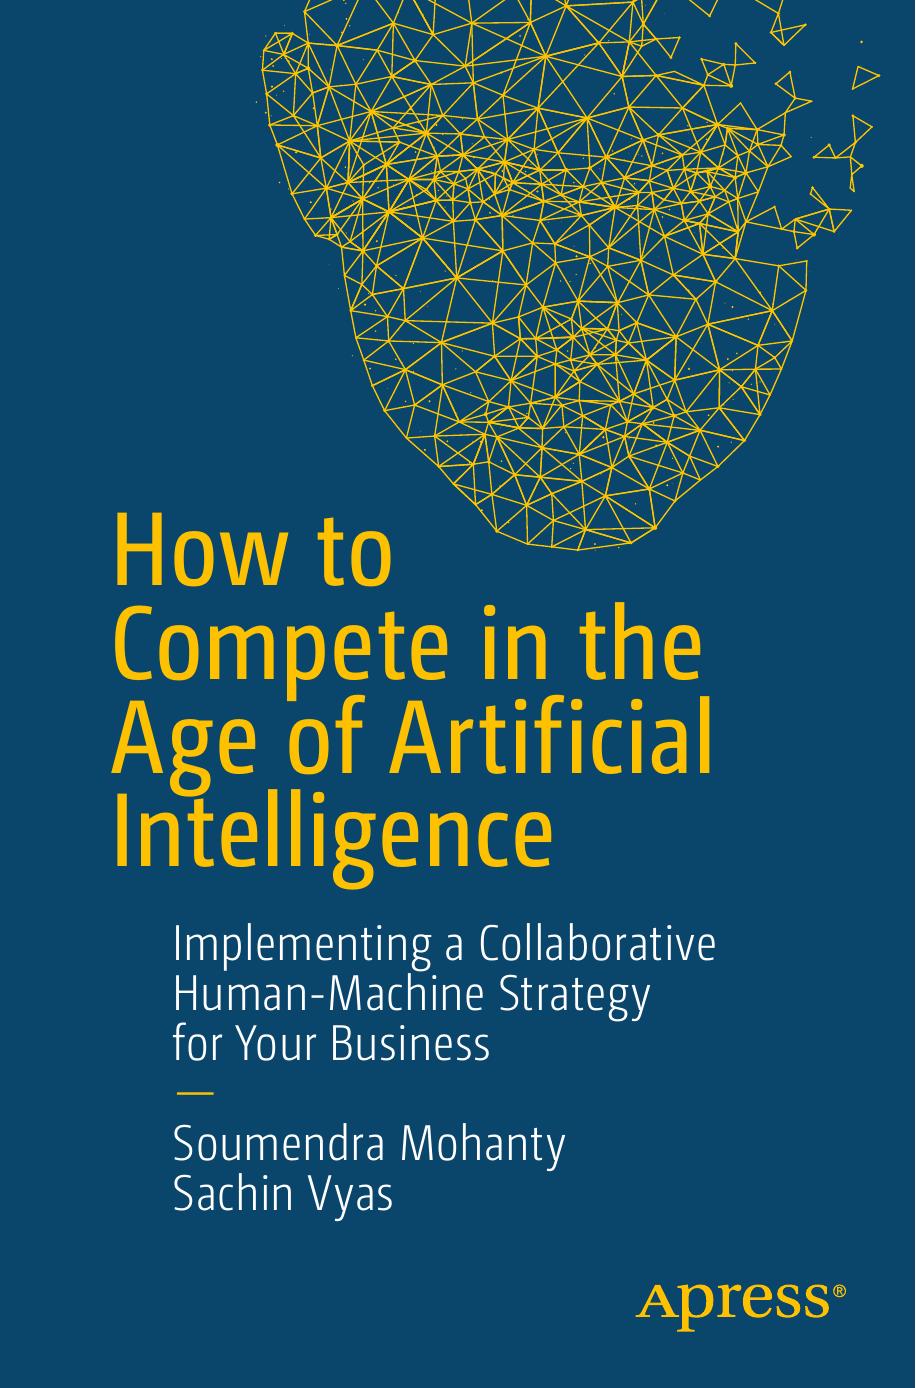 How to Compete in the Age of Artificial Intelligence  Implementing a Collaborative Human-Machine Strategy for Your Business 2018